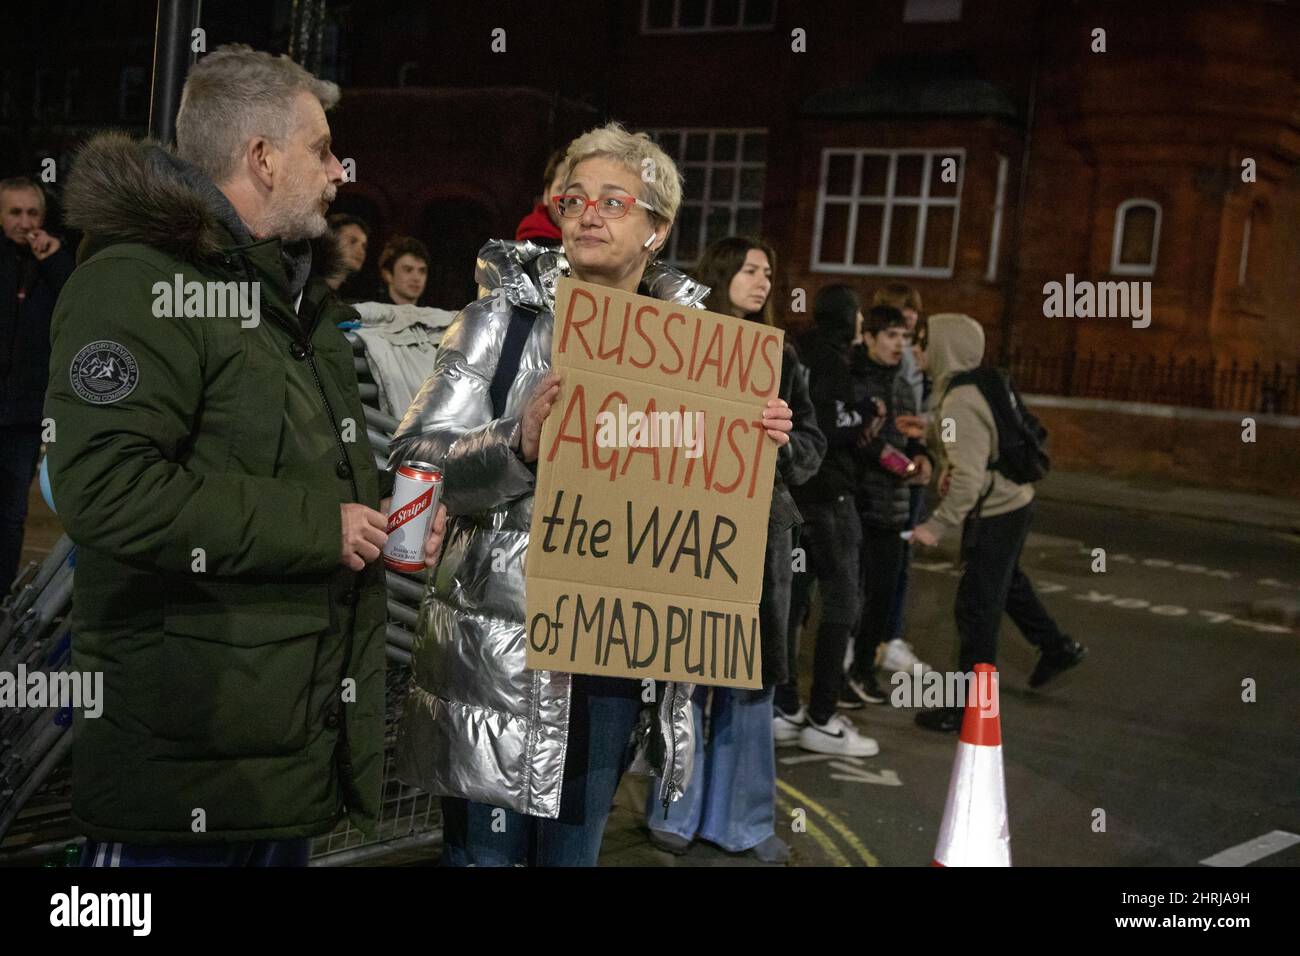 London, UK, 25th Feb 2022 A woman holding a protest sign outside the Russian Embassy following Russia's recent attack on the Ukraine. Credit: Kiki Streitberger/Alamy Live News Credit: Kiki Streitberger/Alamy Live News Stock Photo